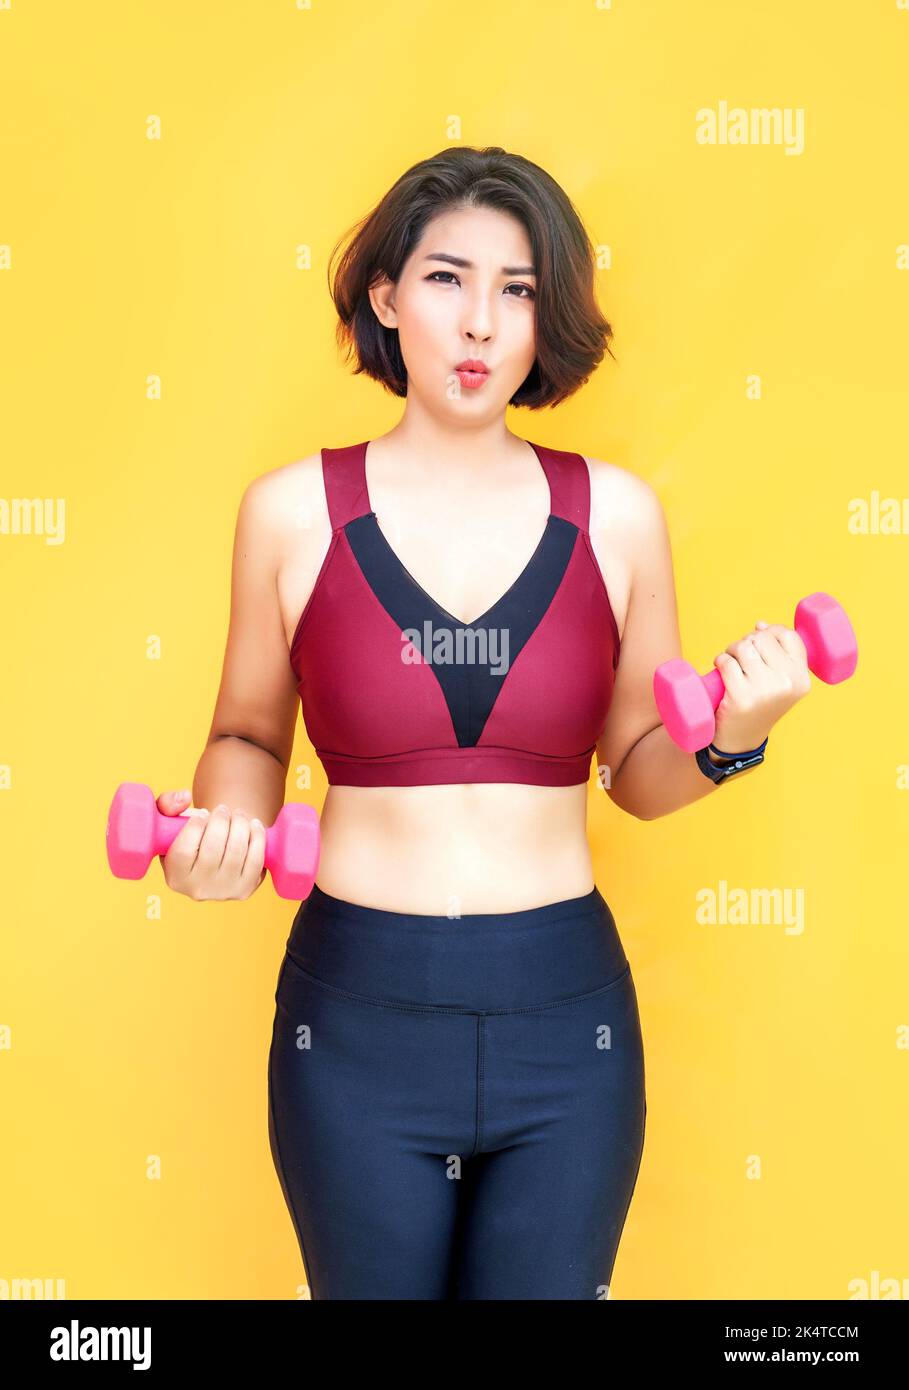 asian woman work out with dumbbel for wellbeing on isolated background Stock Photo